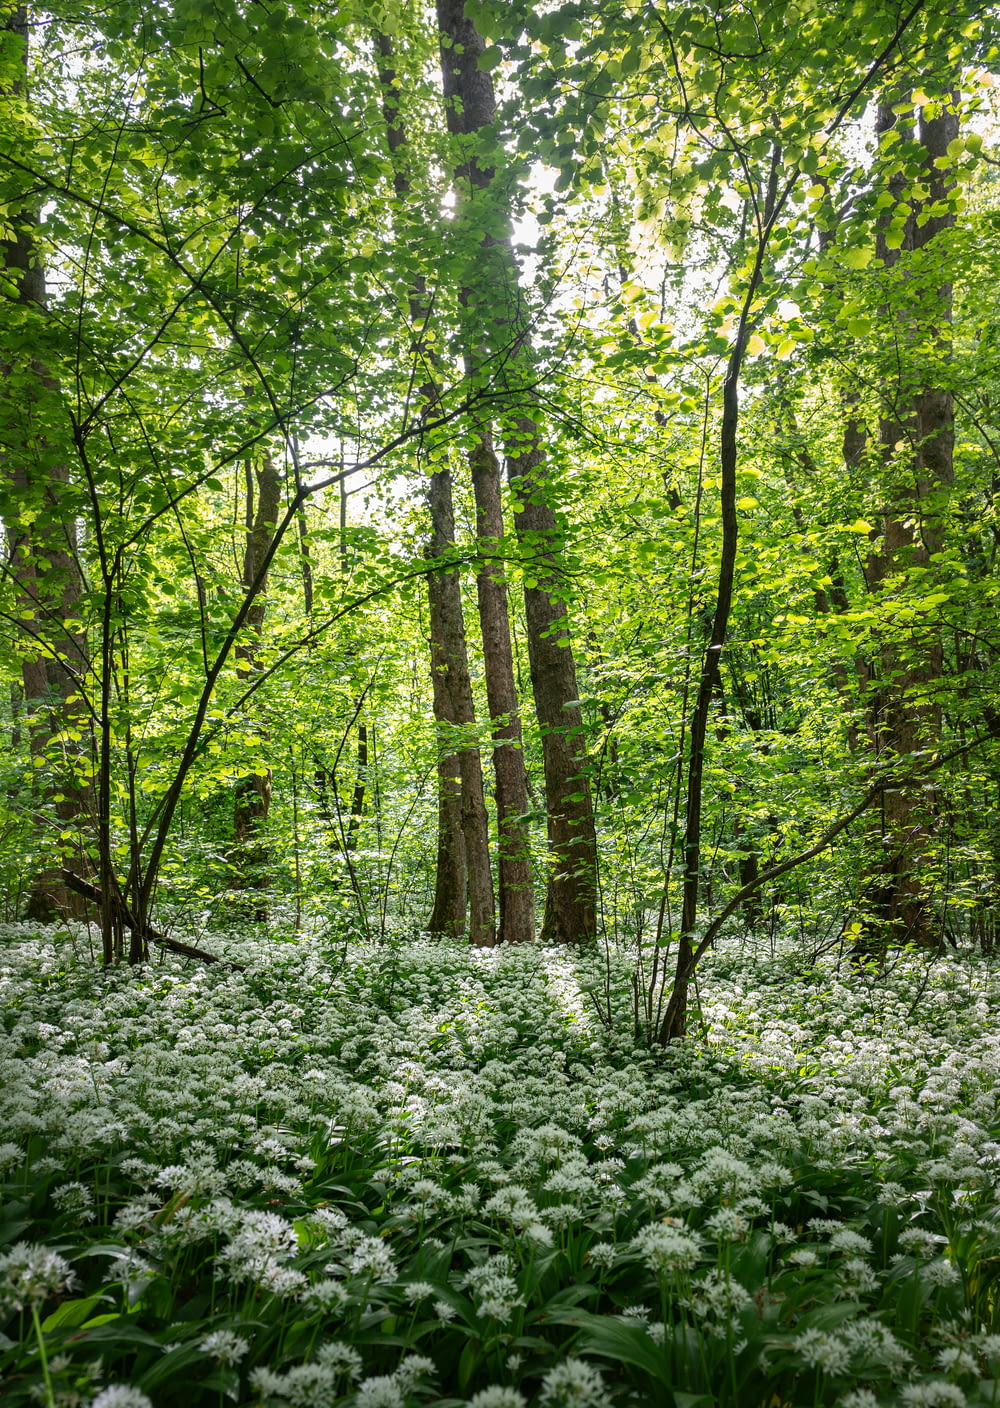 a lush green forest filled with lots of white flowers